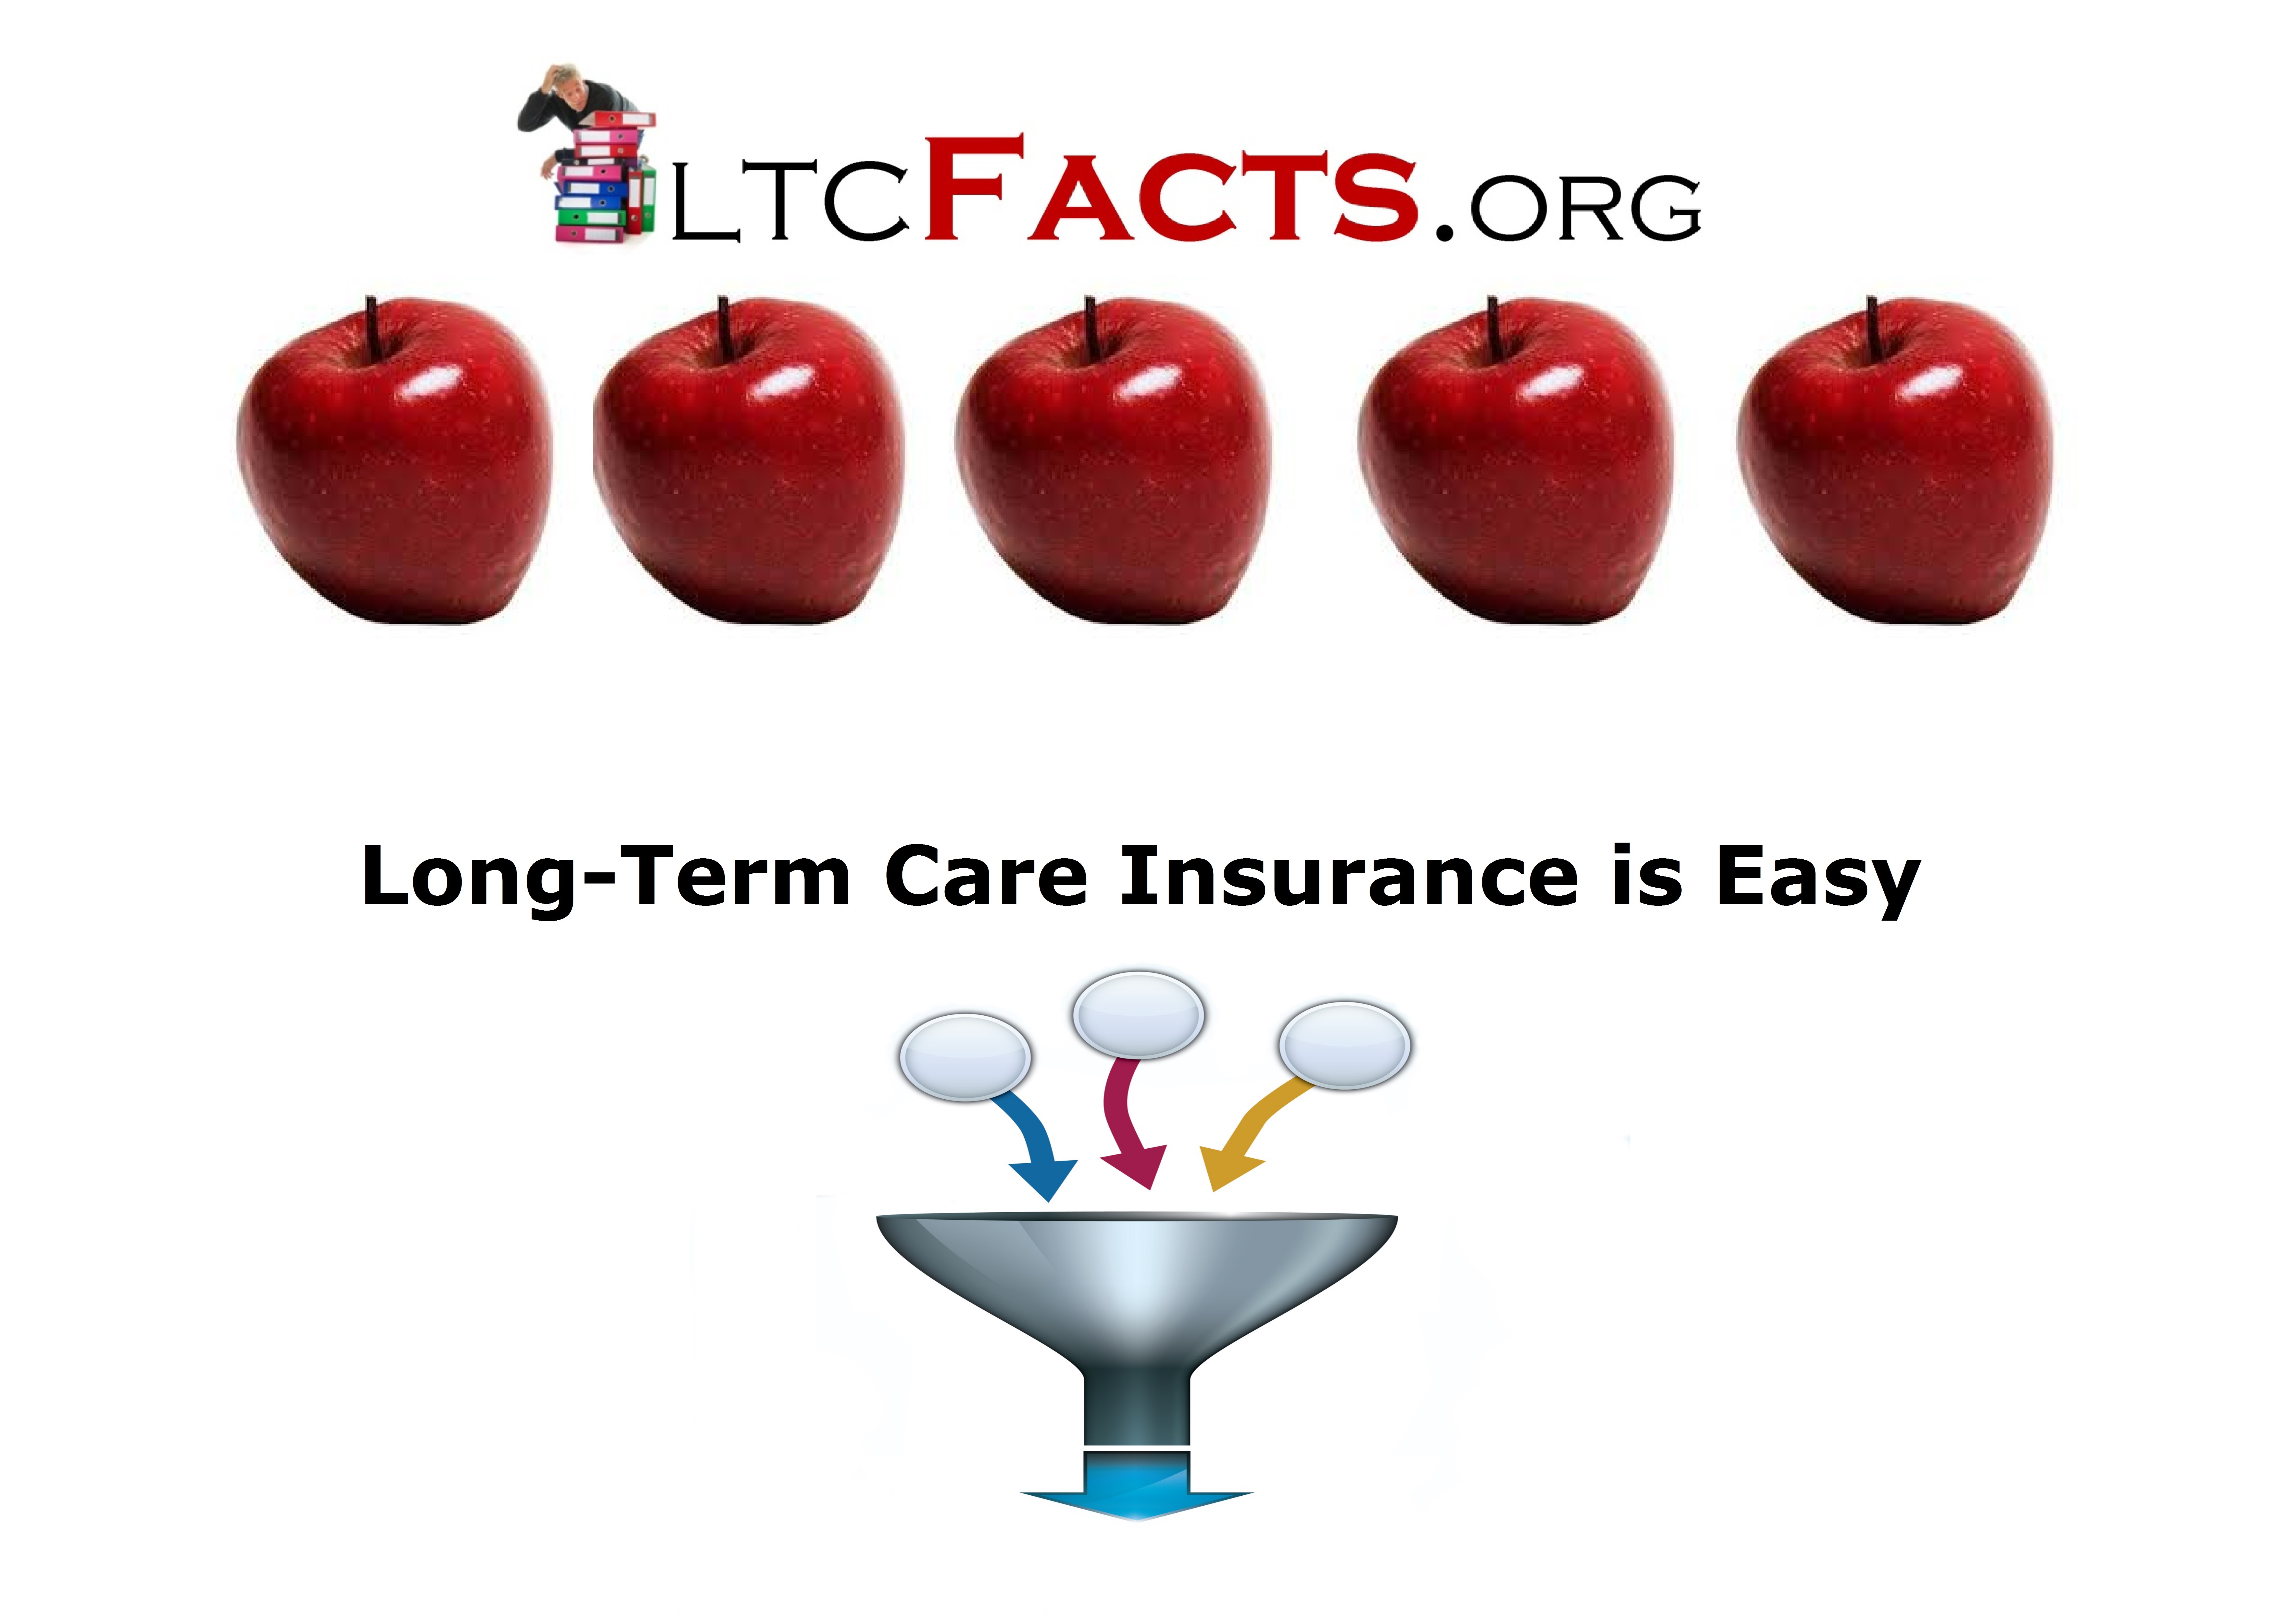 Long-term care insurance is easy video image